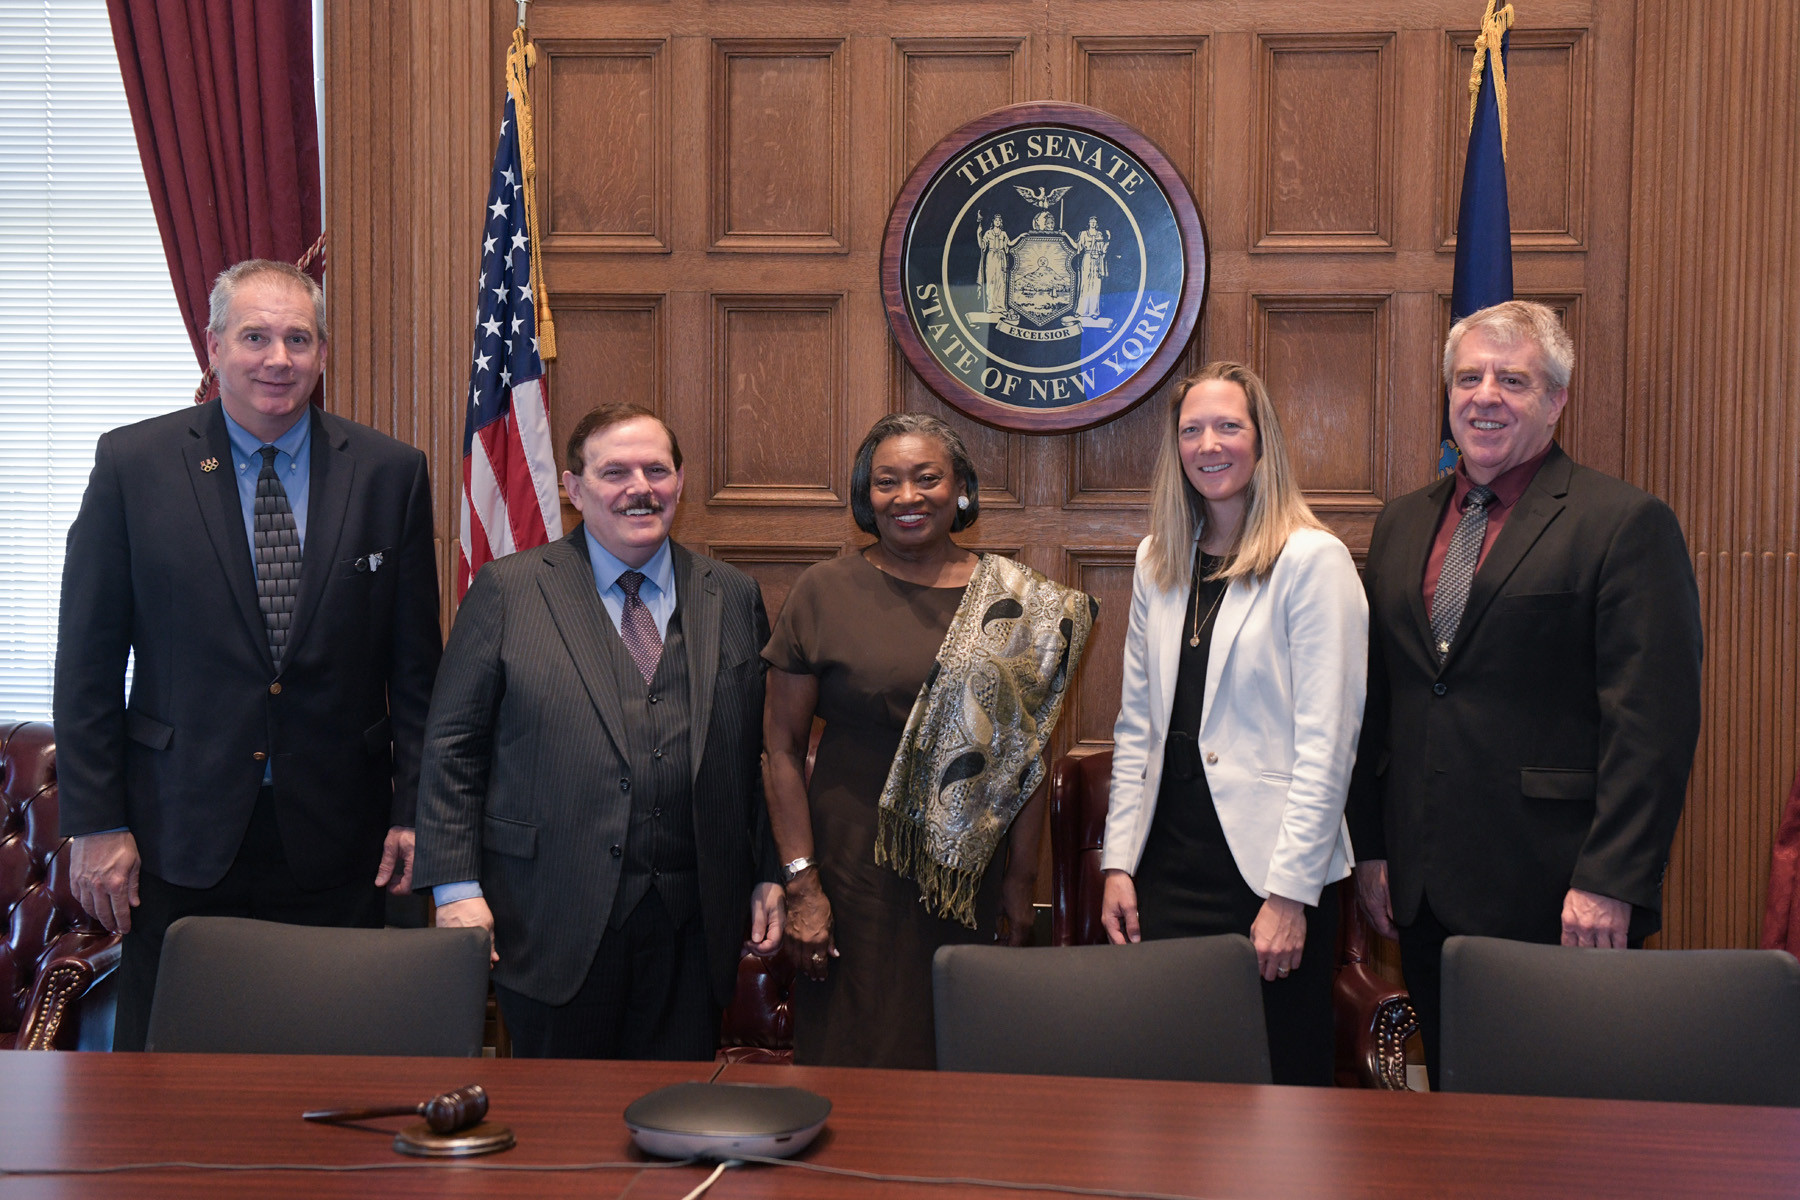 New York Senate Majority leader Andrea Stewart-Cousins (centre) met representatives of Lake Placid University Games organisers and leaders of local commerce at the New York State Assembly in Albany ©Adirondack Sports Council